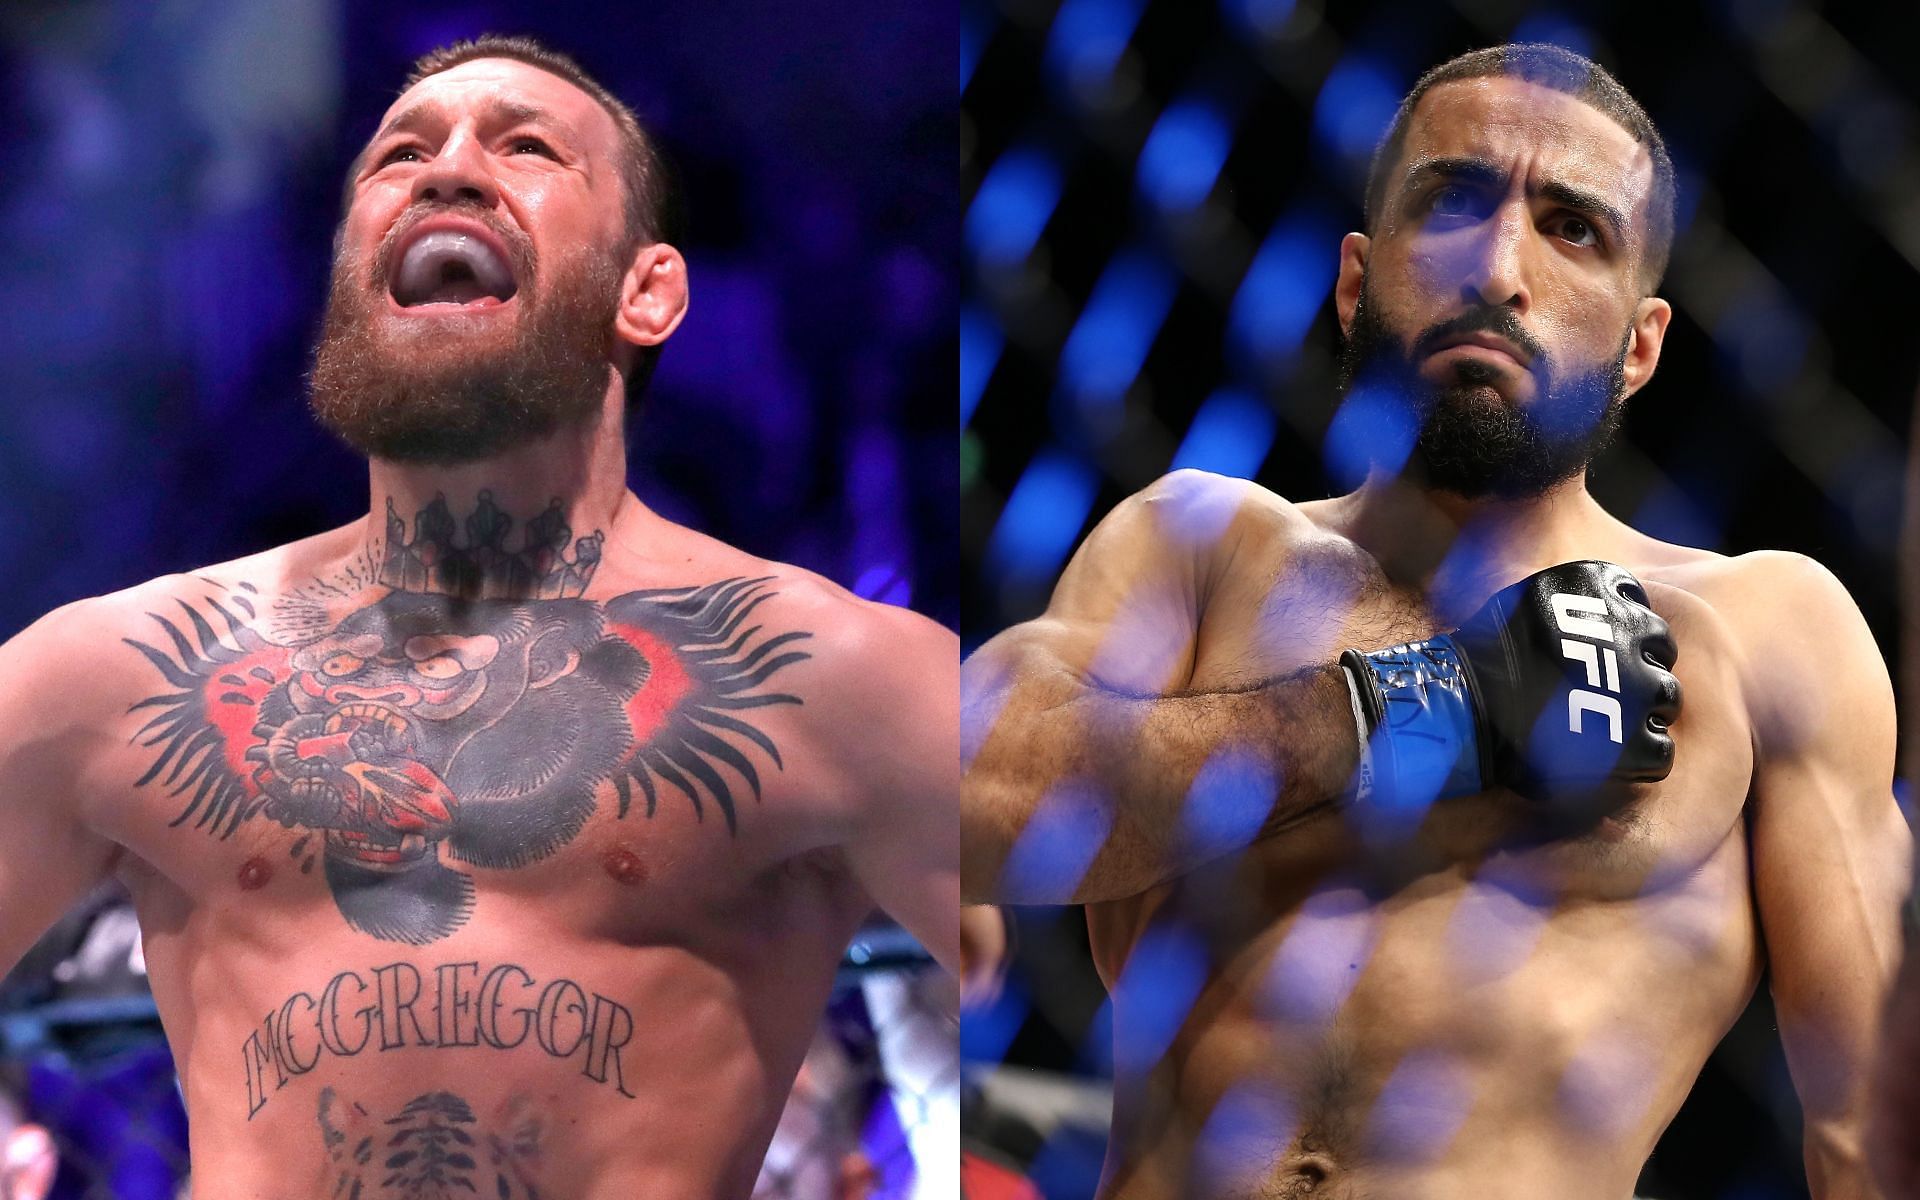 Conor McGregor (left) and Belal Muhammad (right) (Image via Getty)